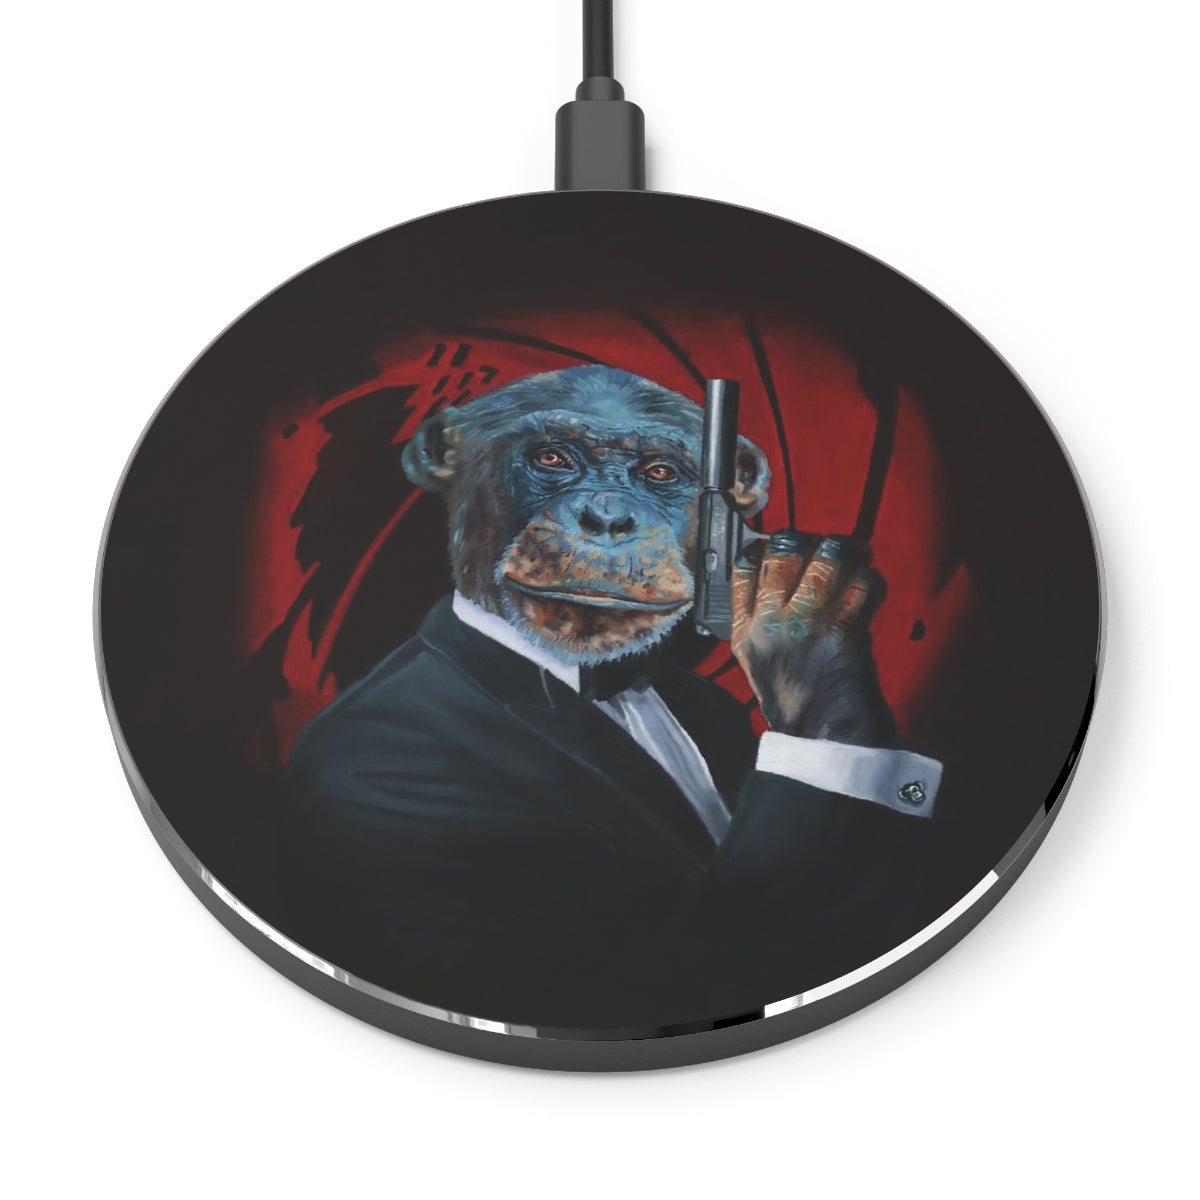 Tony South: "Shaken Not Stirred" Wireless Charger